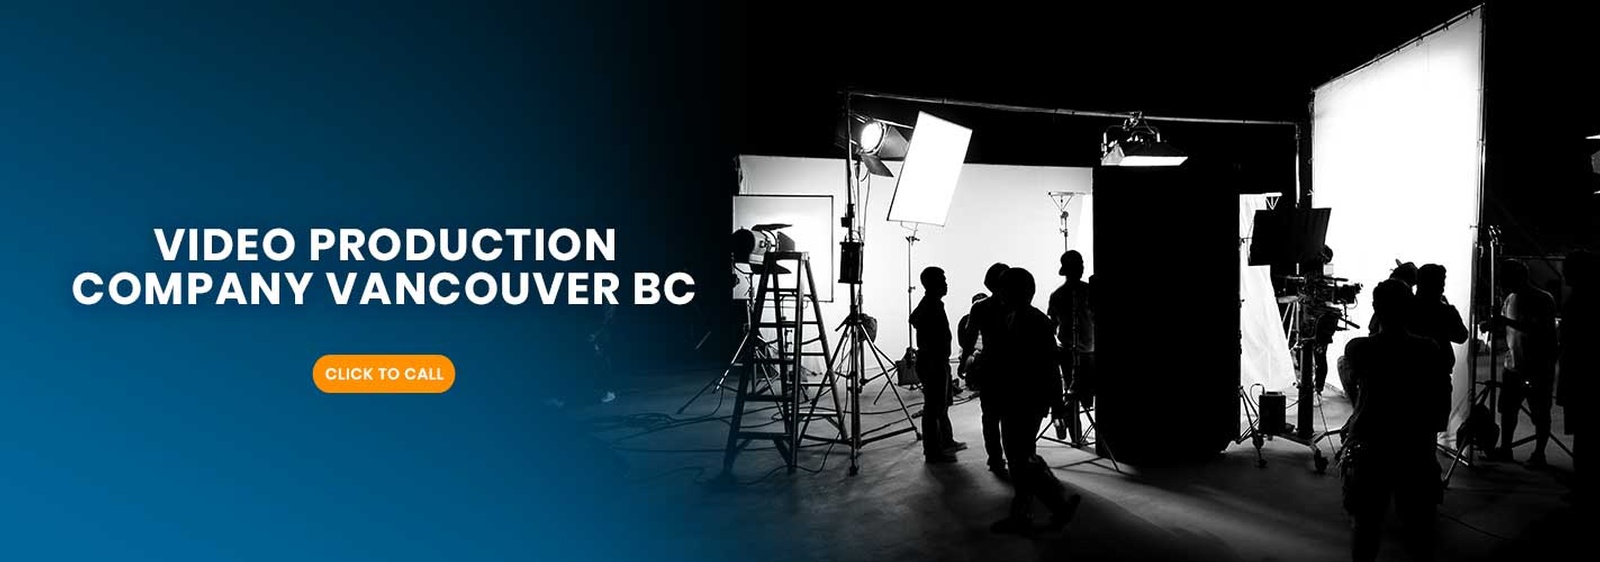 Video Production Company Vancouver BC